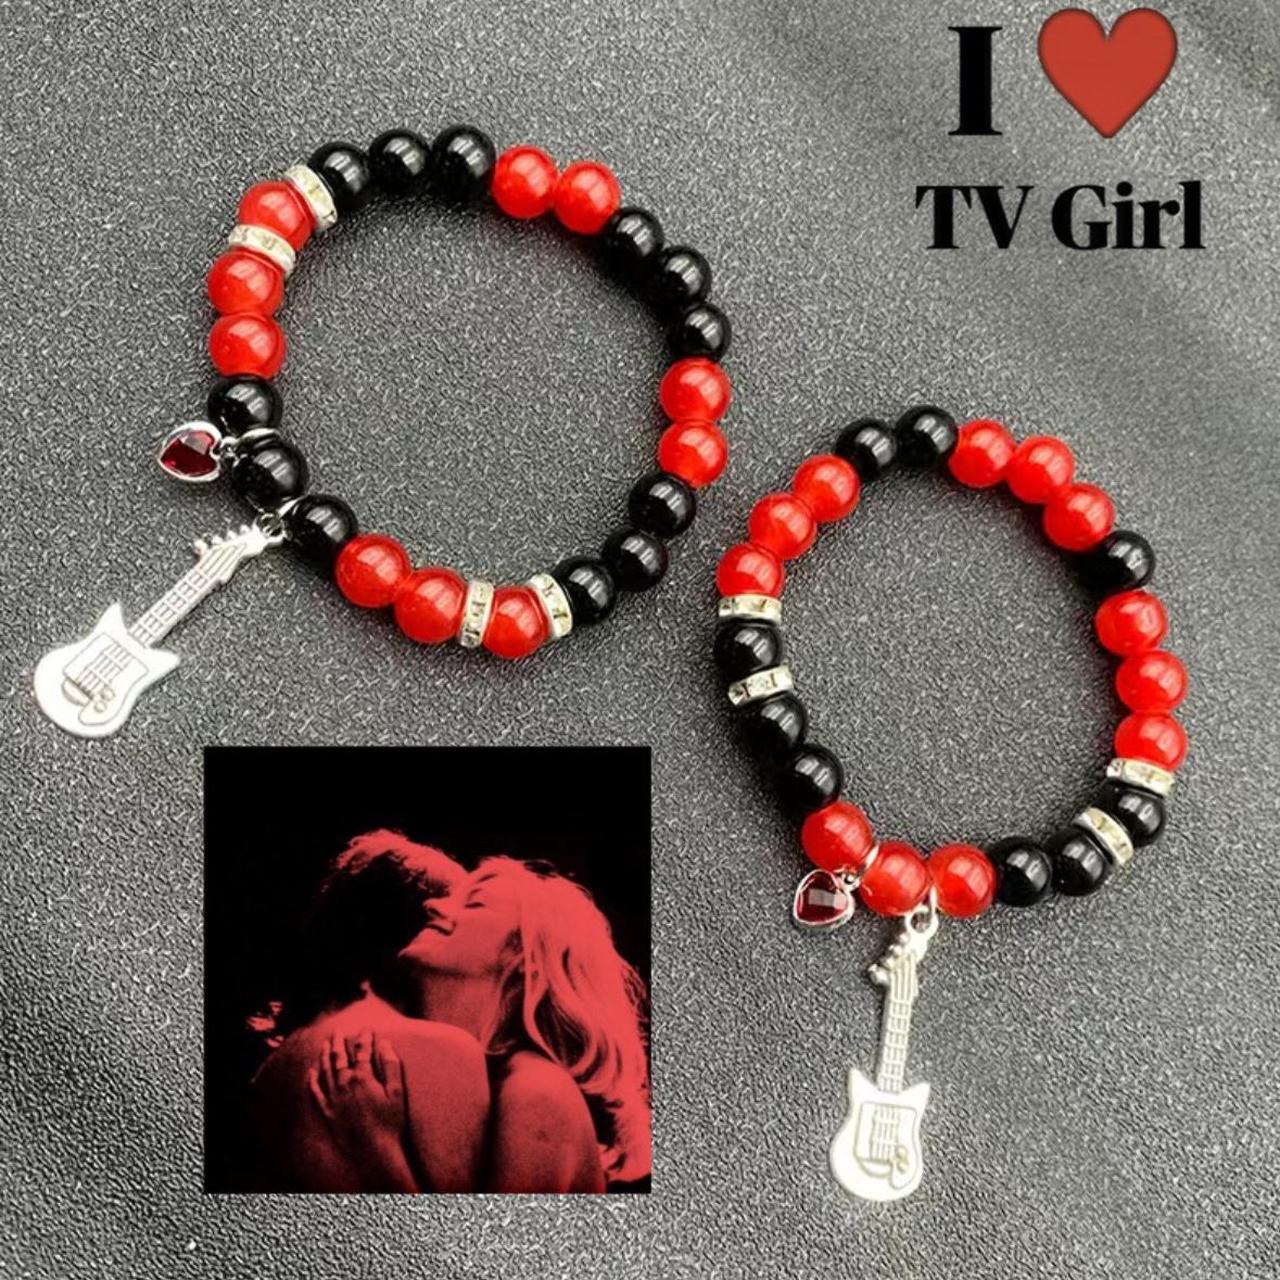 Tv Girl Bracelet Beaded Who Really Cares Jewelry Tv Girl Merch French Exit  Necklace 